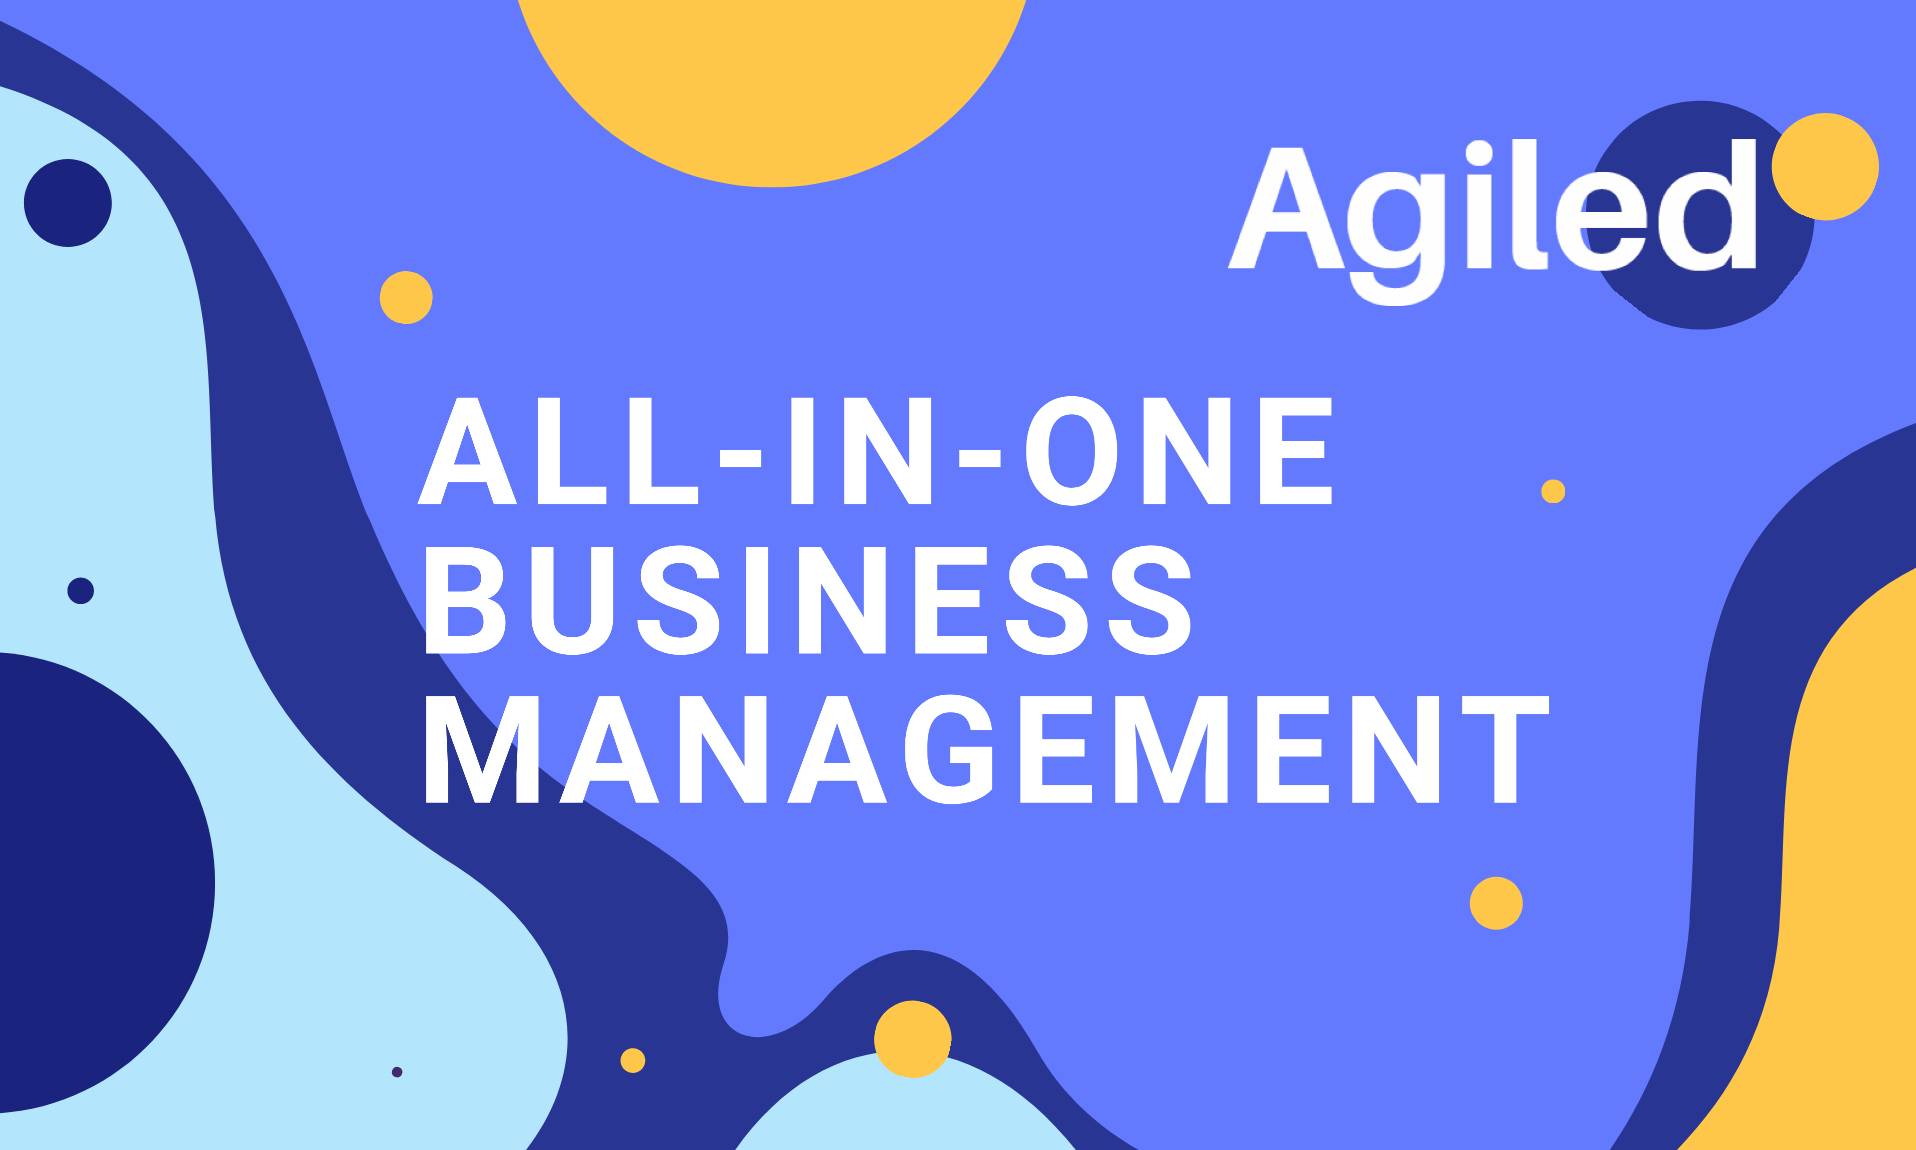 Agiled - An ALL-IN-ONE Business Management Tool